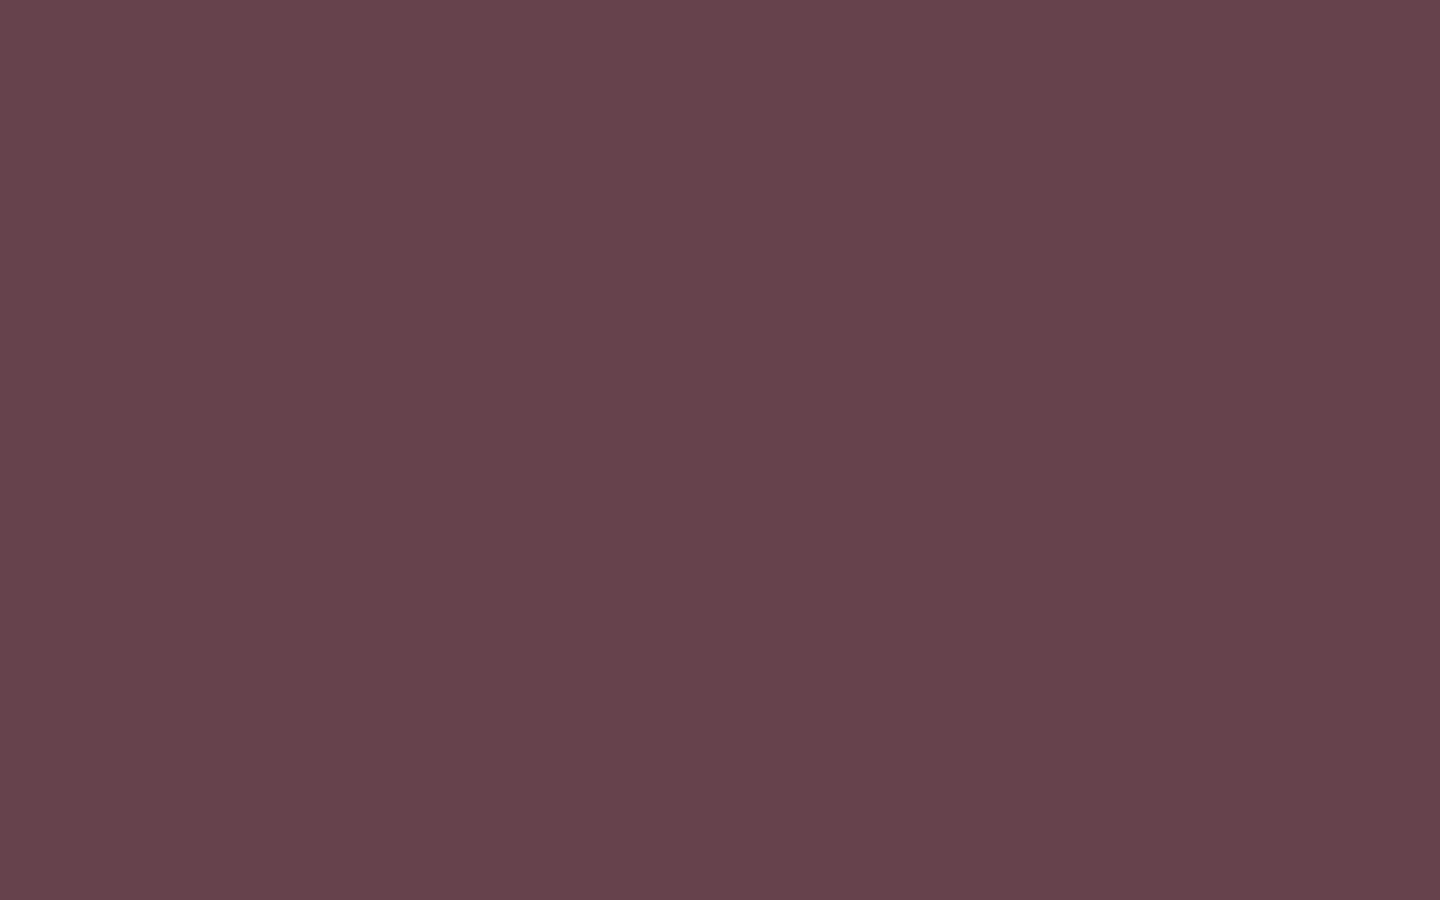 1440x900 Deep Tuscan Red Solid Color Background